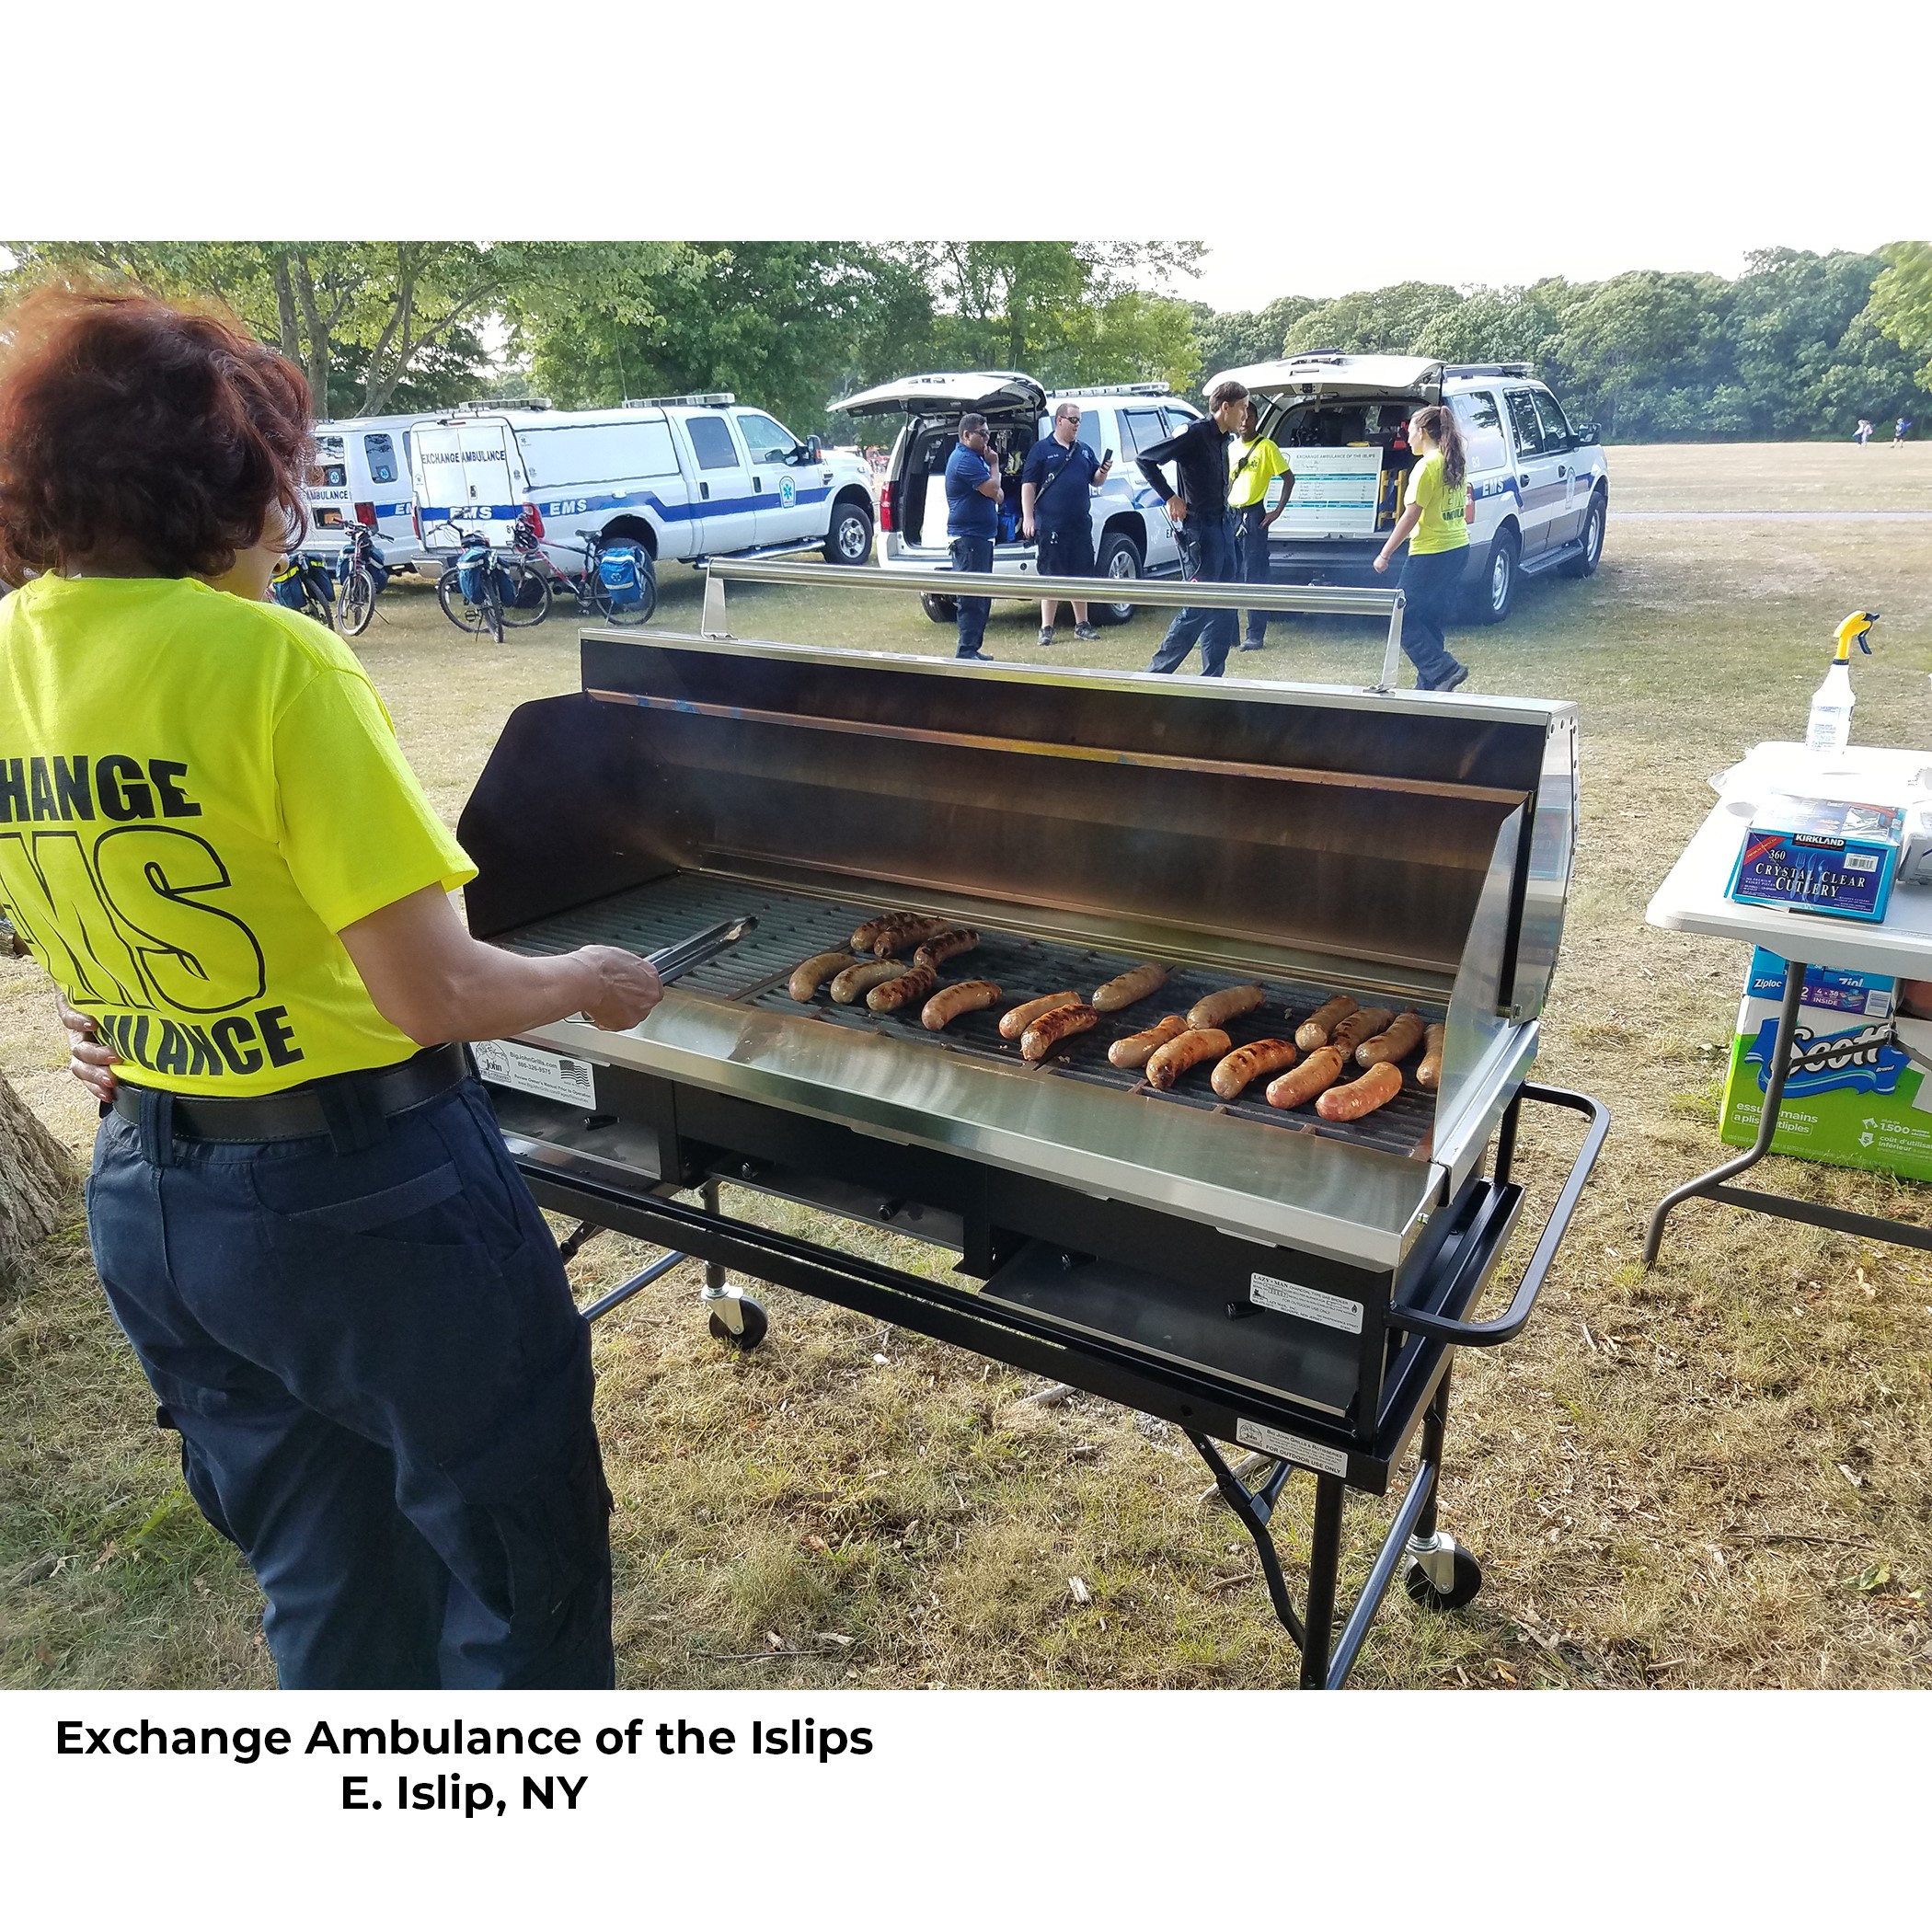 https://www.bigjohngrills.com/image?filename=Products/08%20%20%20%20%20A3P/Photo%20Gallery/EXCHANGE%20AMBULANCE%202.jpg&width=0&height=0